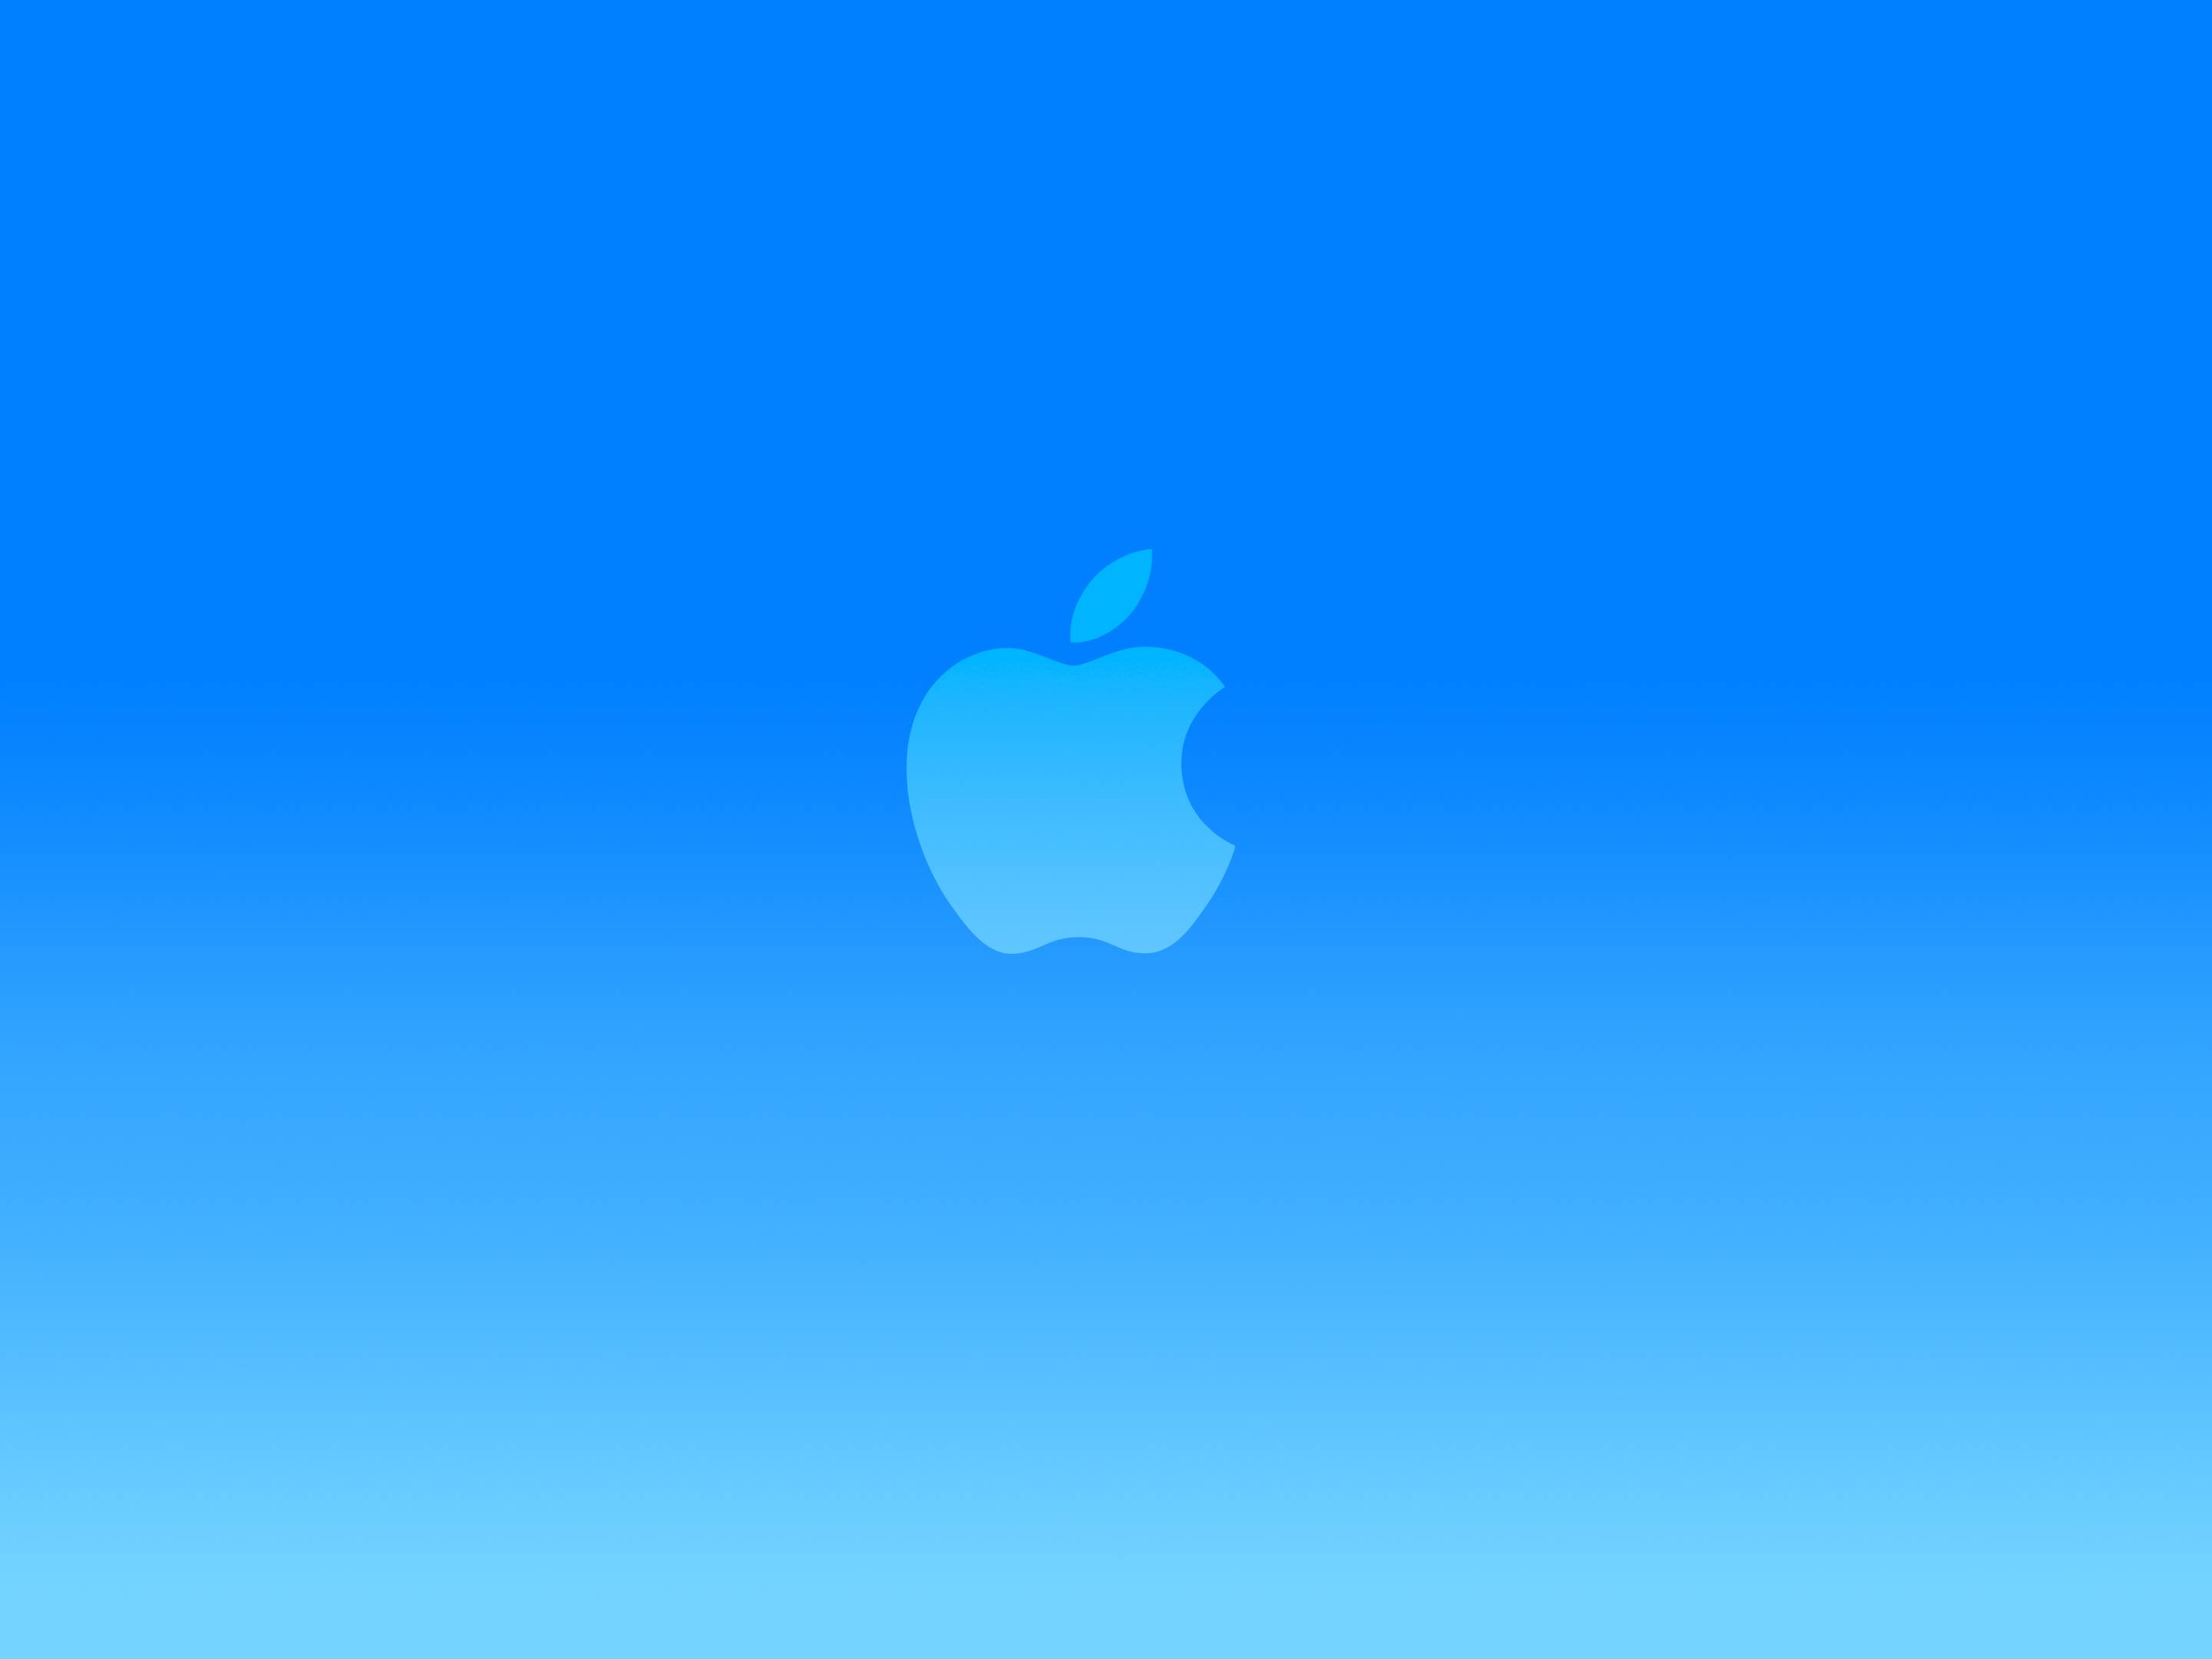 Wallpaper Ios Apples Pacific Blue Slope Tints and Shades Background   Download Free Image